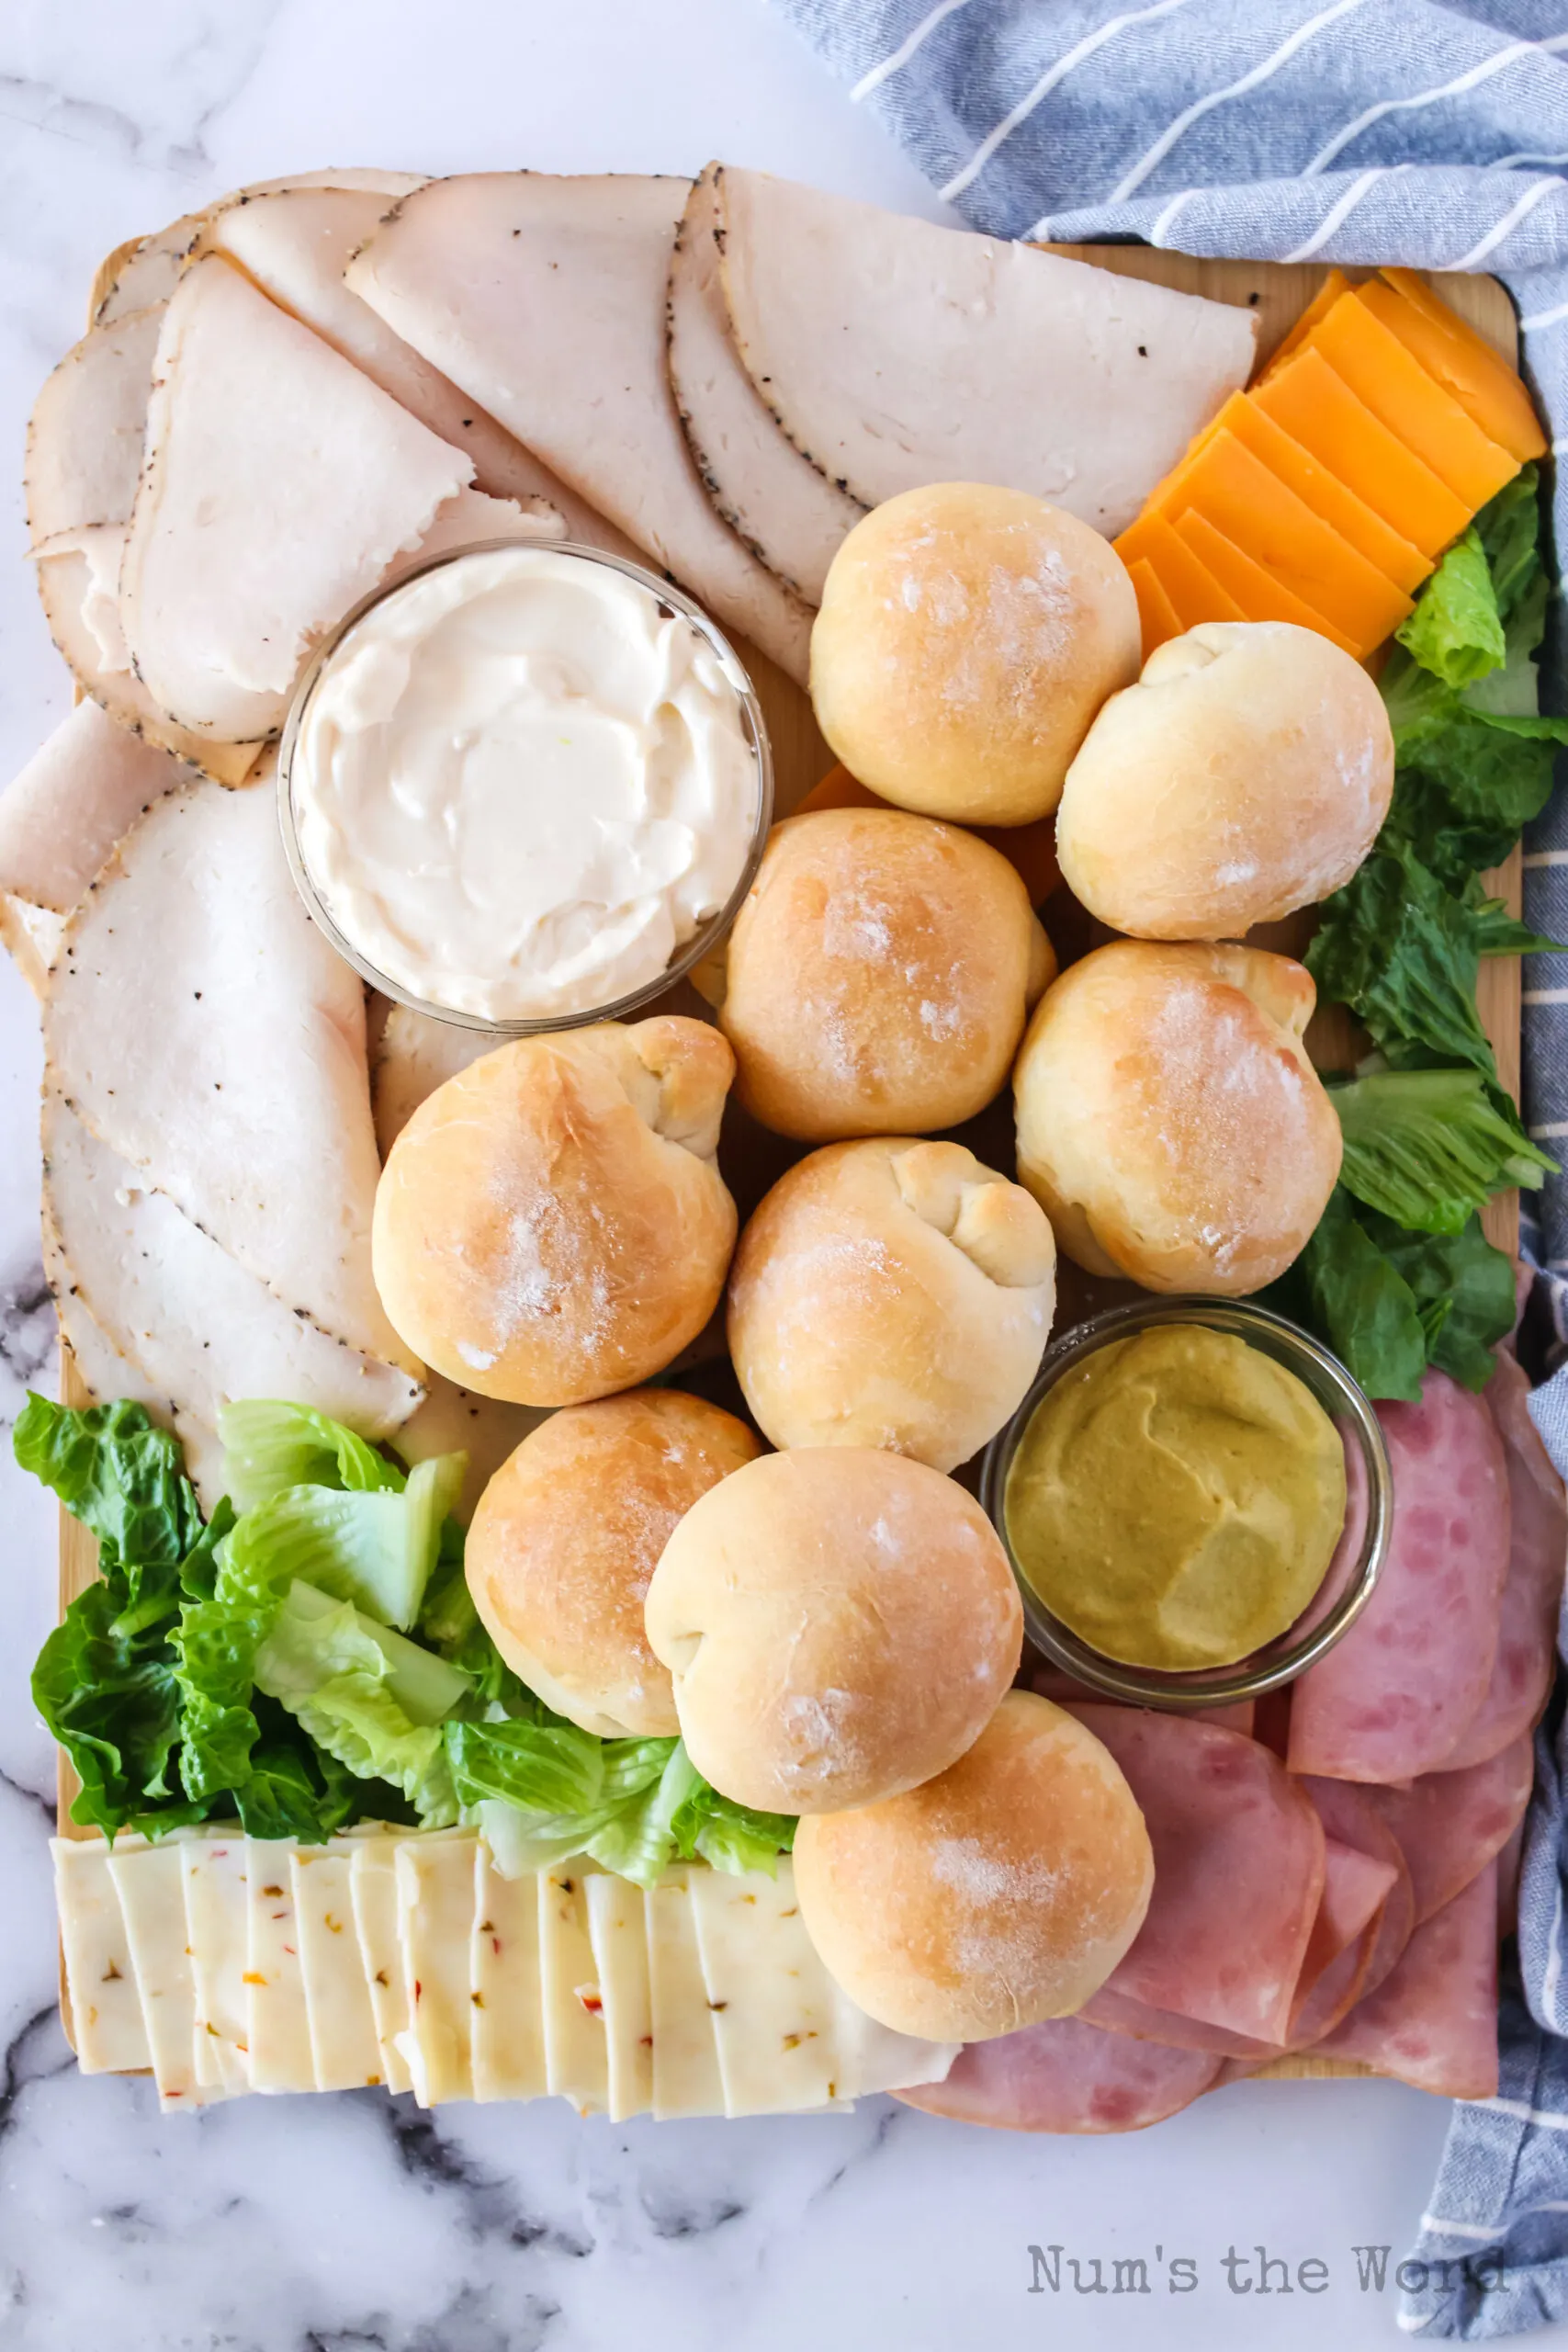 zoomed out image of sandwich charcuterie board with buns, meats, cheeses and spreads. board.